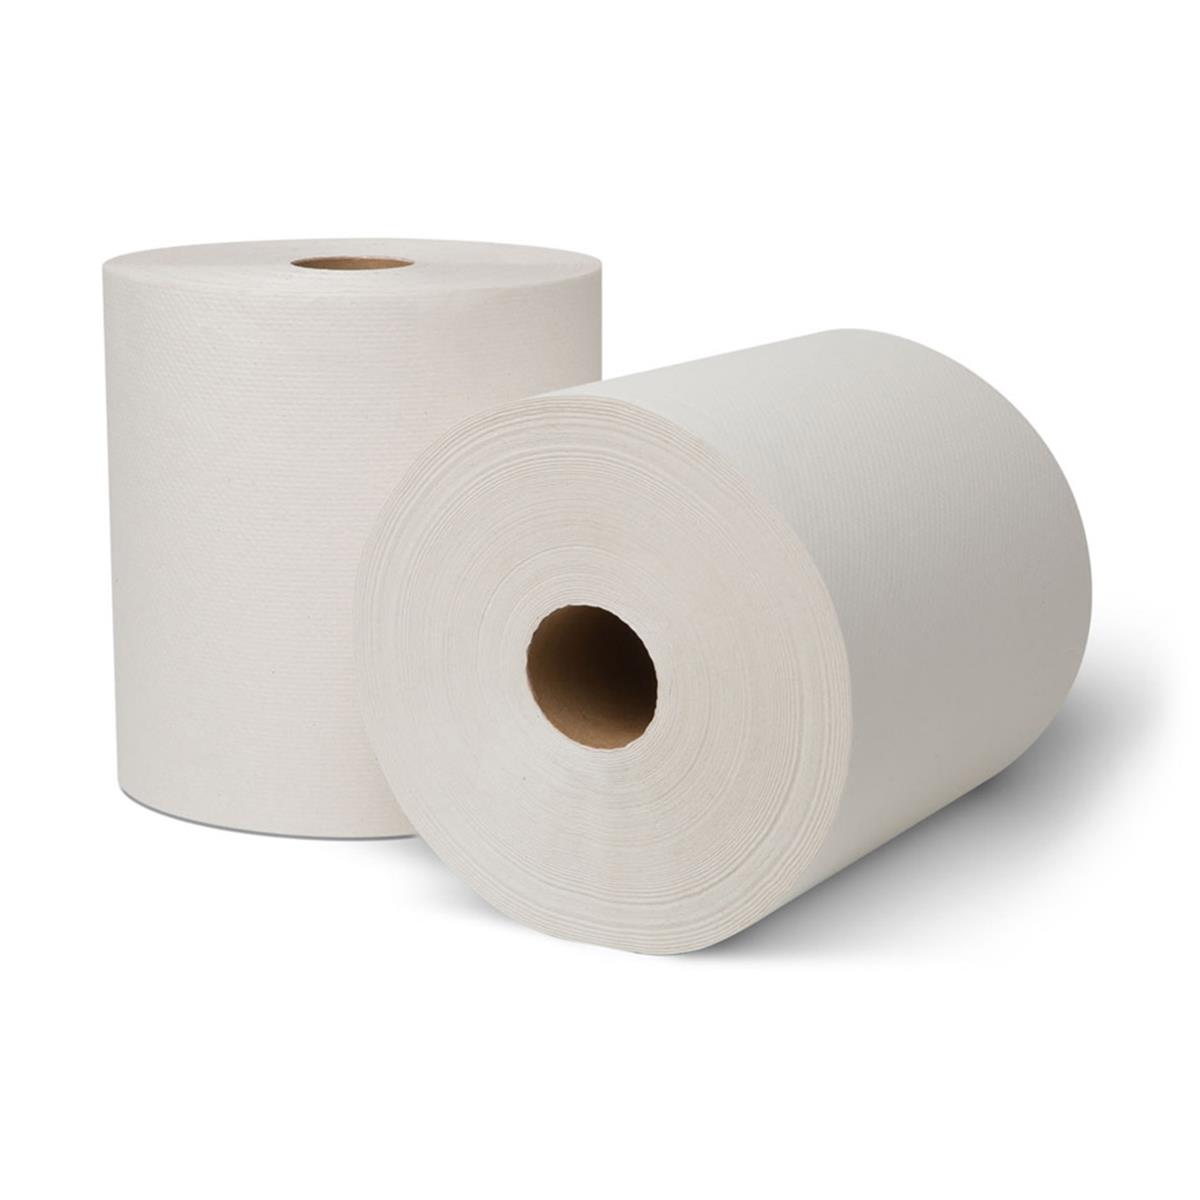 8031600 Pe 8 In. X 630 Ft. White Ecosoft Controlled Roll Towel - Case Of 6